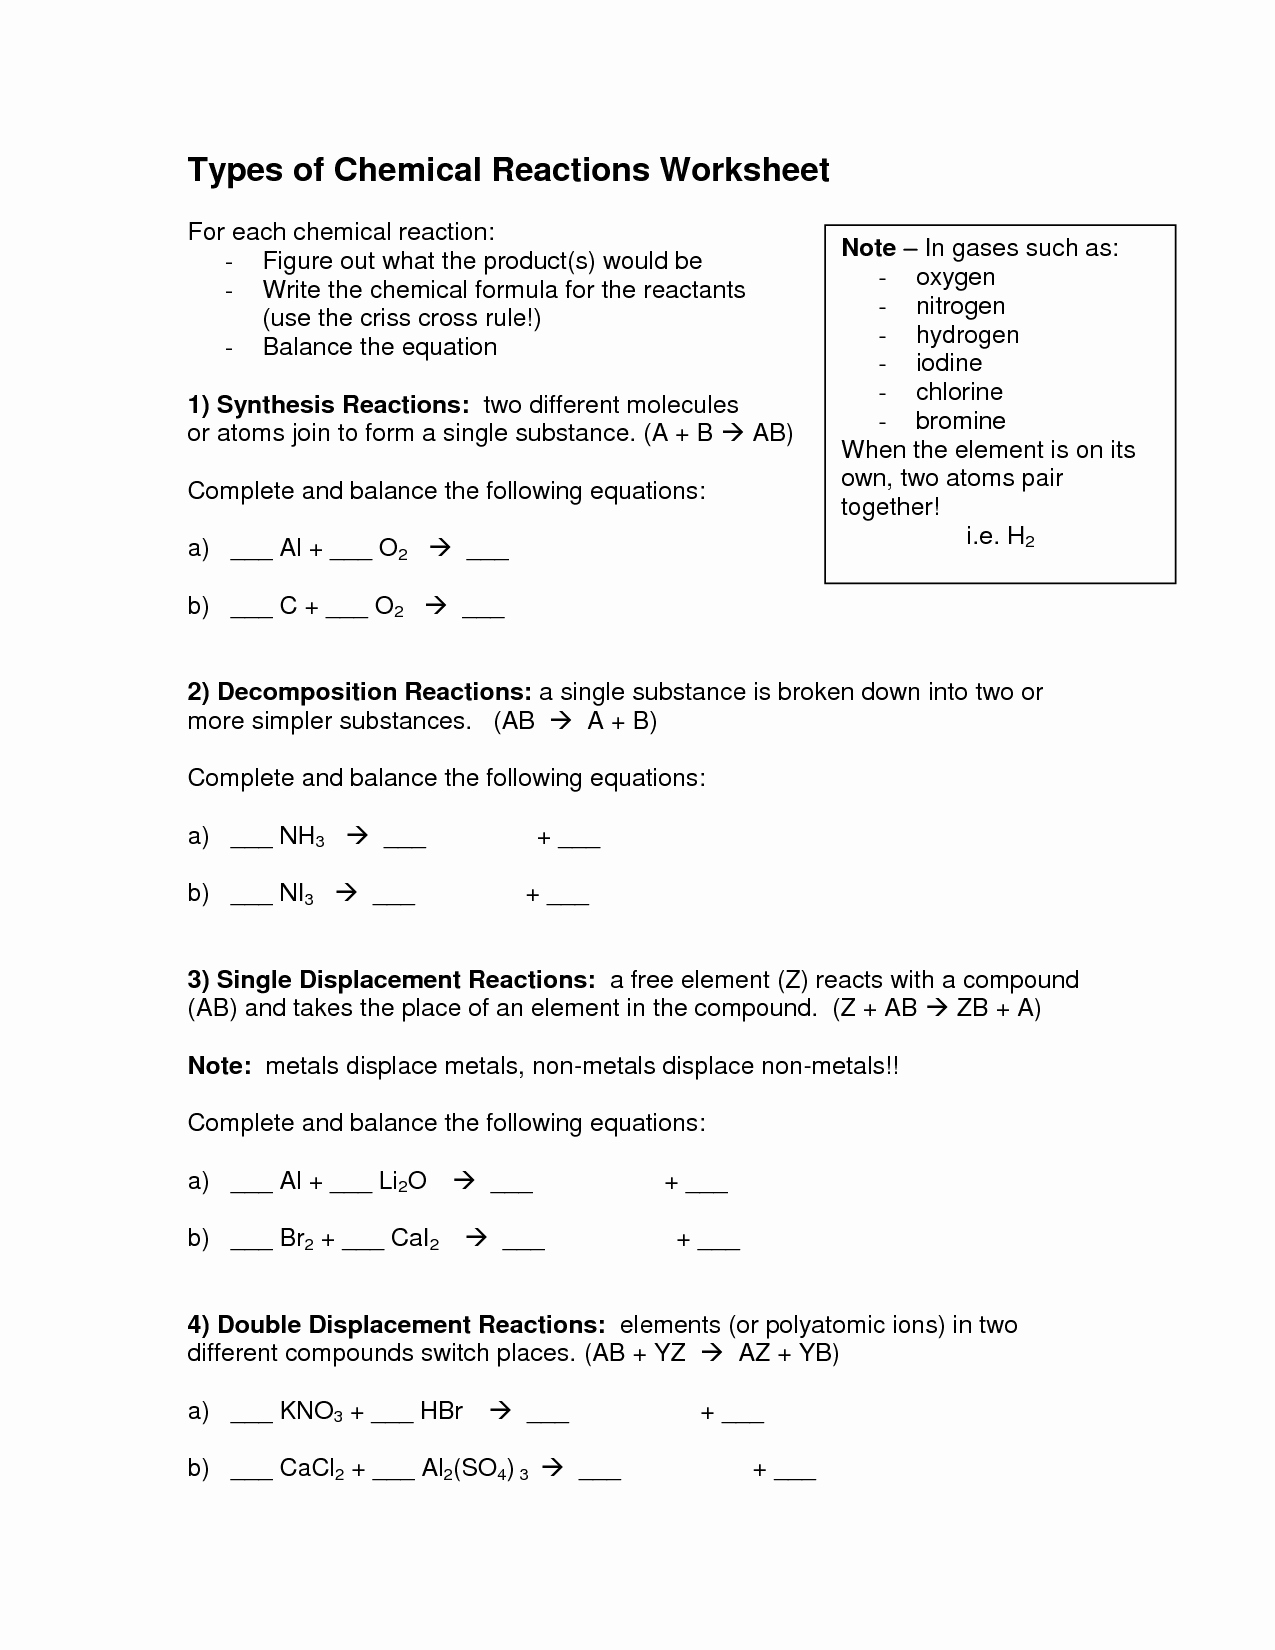 Classifying Chemical Reactions Worksheet Awesome 16 Best Of Types Chemical Reactions Worksheets